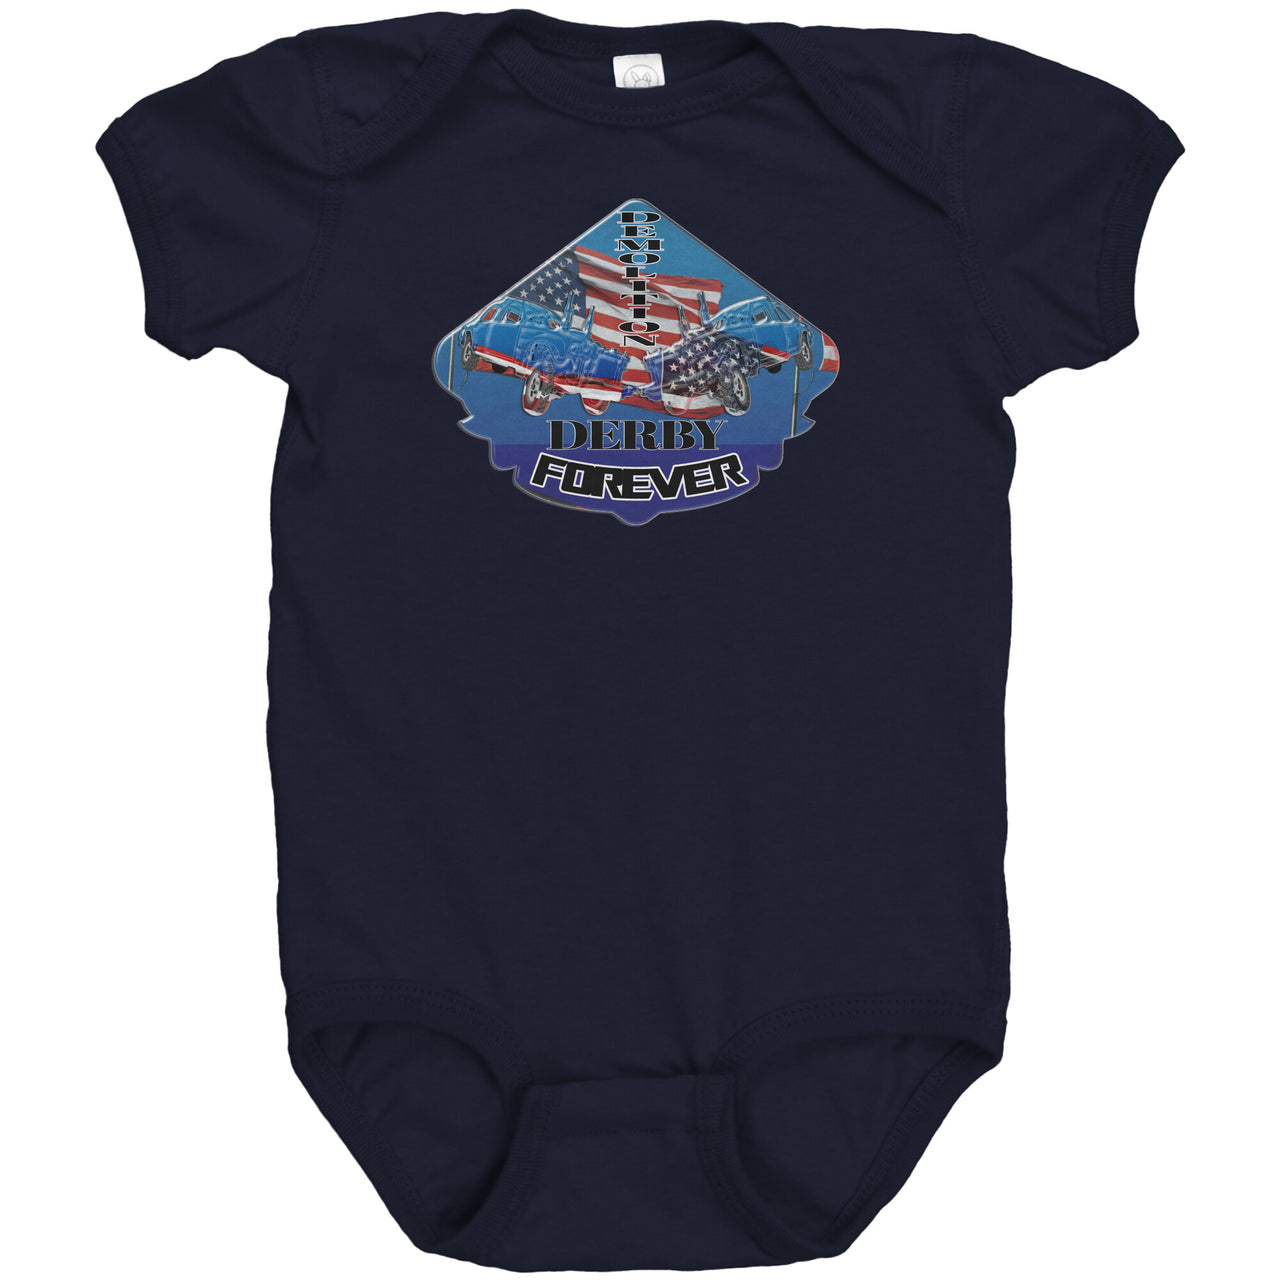 USA Demolition Derby Forever Baby T-shirts